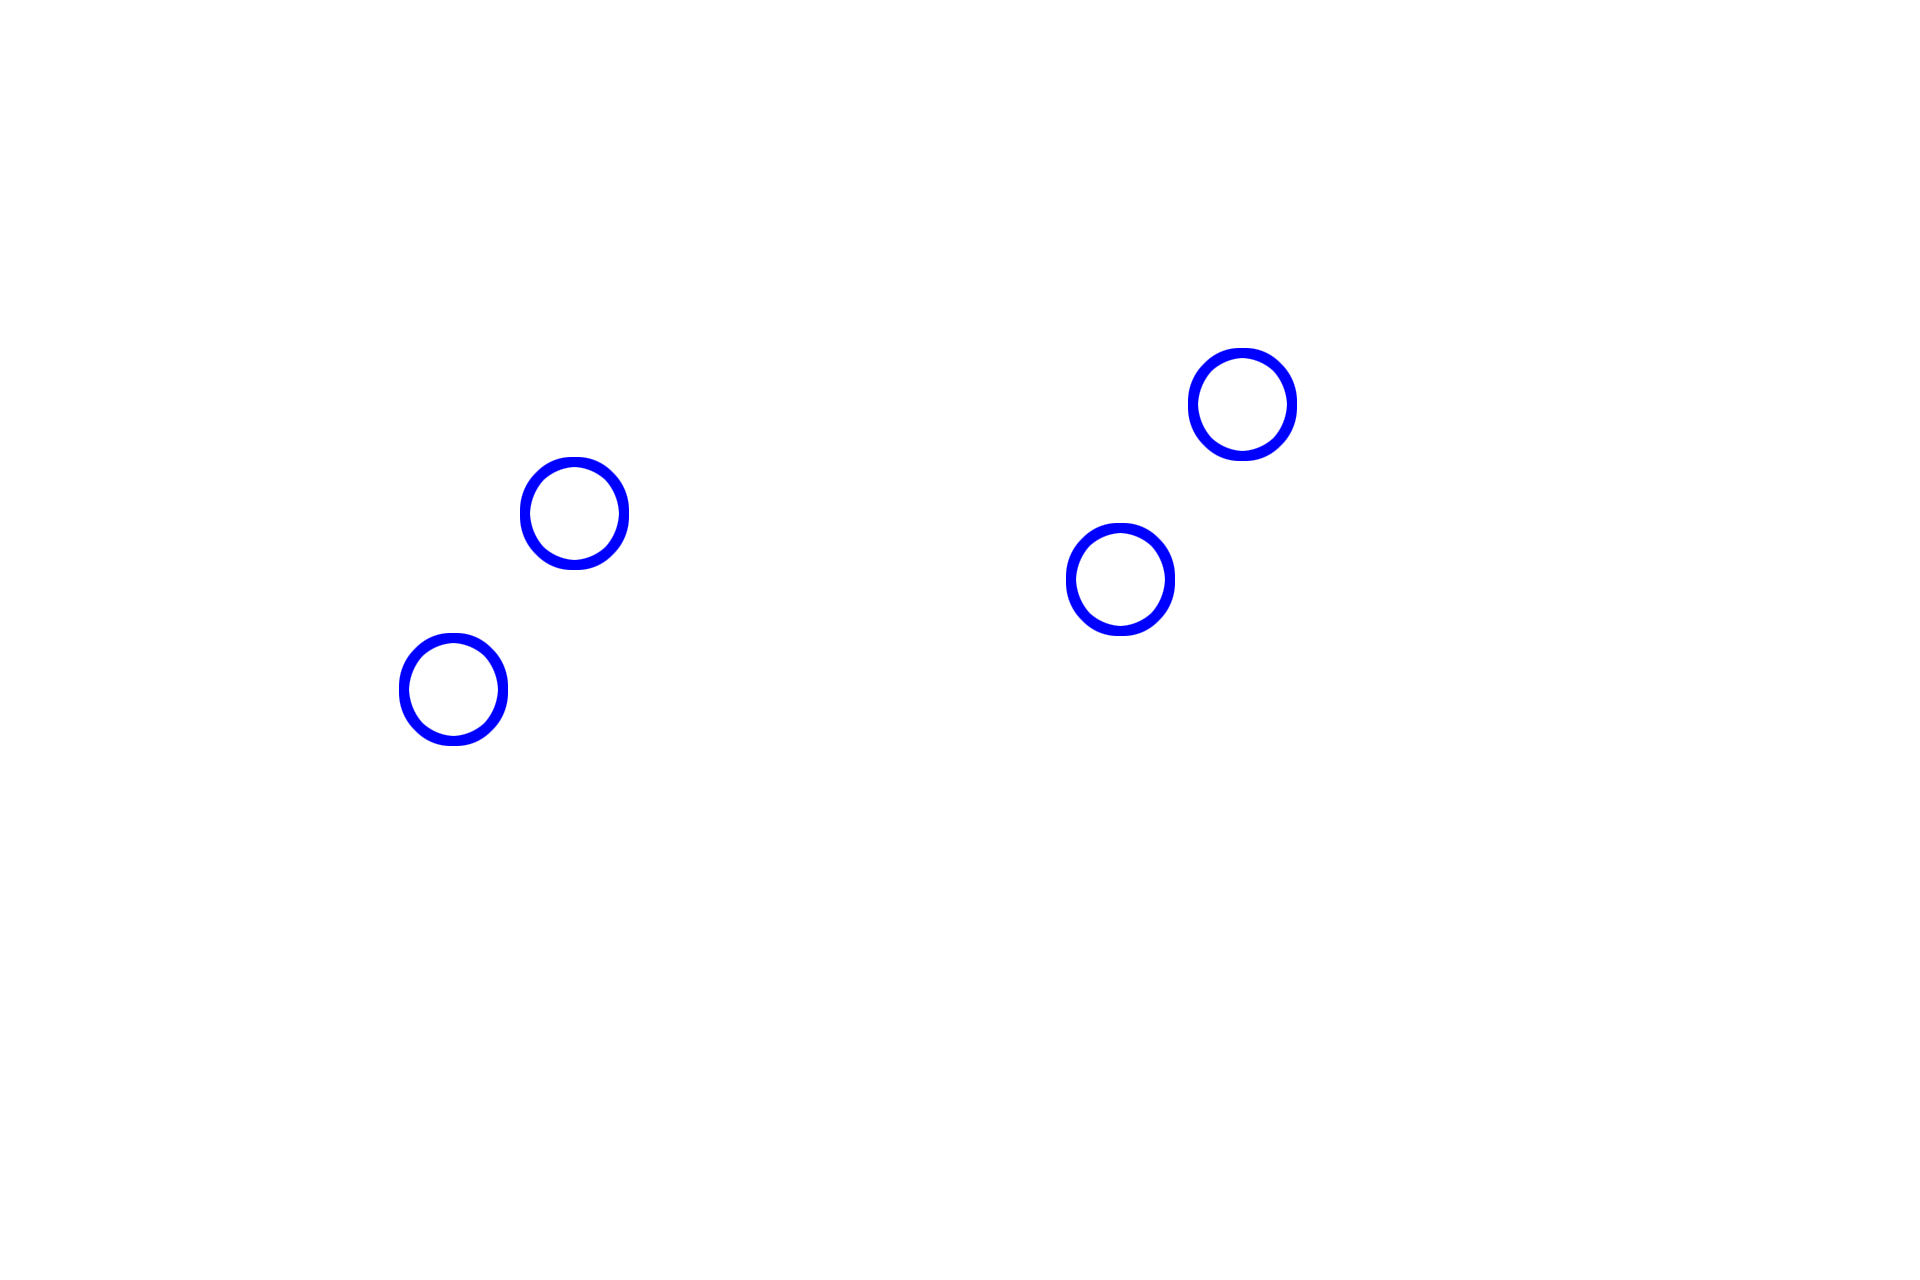 Centrosomes <p>During metaphase, the mitotic spindle is complete and the haploid set of replicated chromosomes (sister chromatids) align at the metaphase plate.  The cohesive protein complex attaching the chromatids is cleaved allowing for separation at the centromere.</p>
